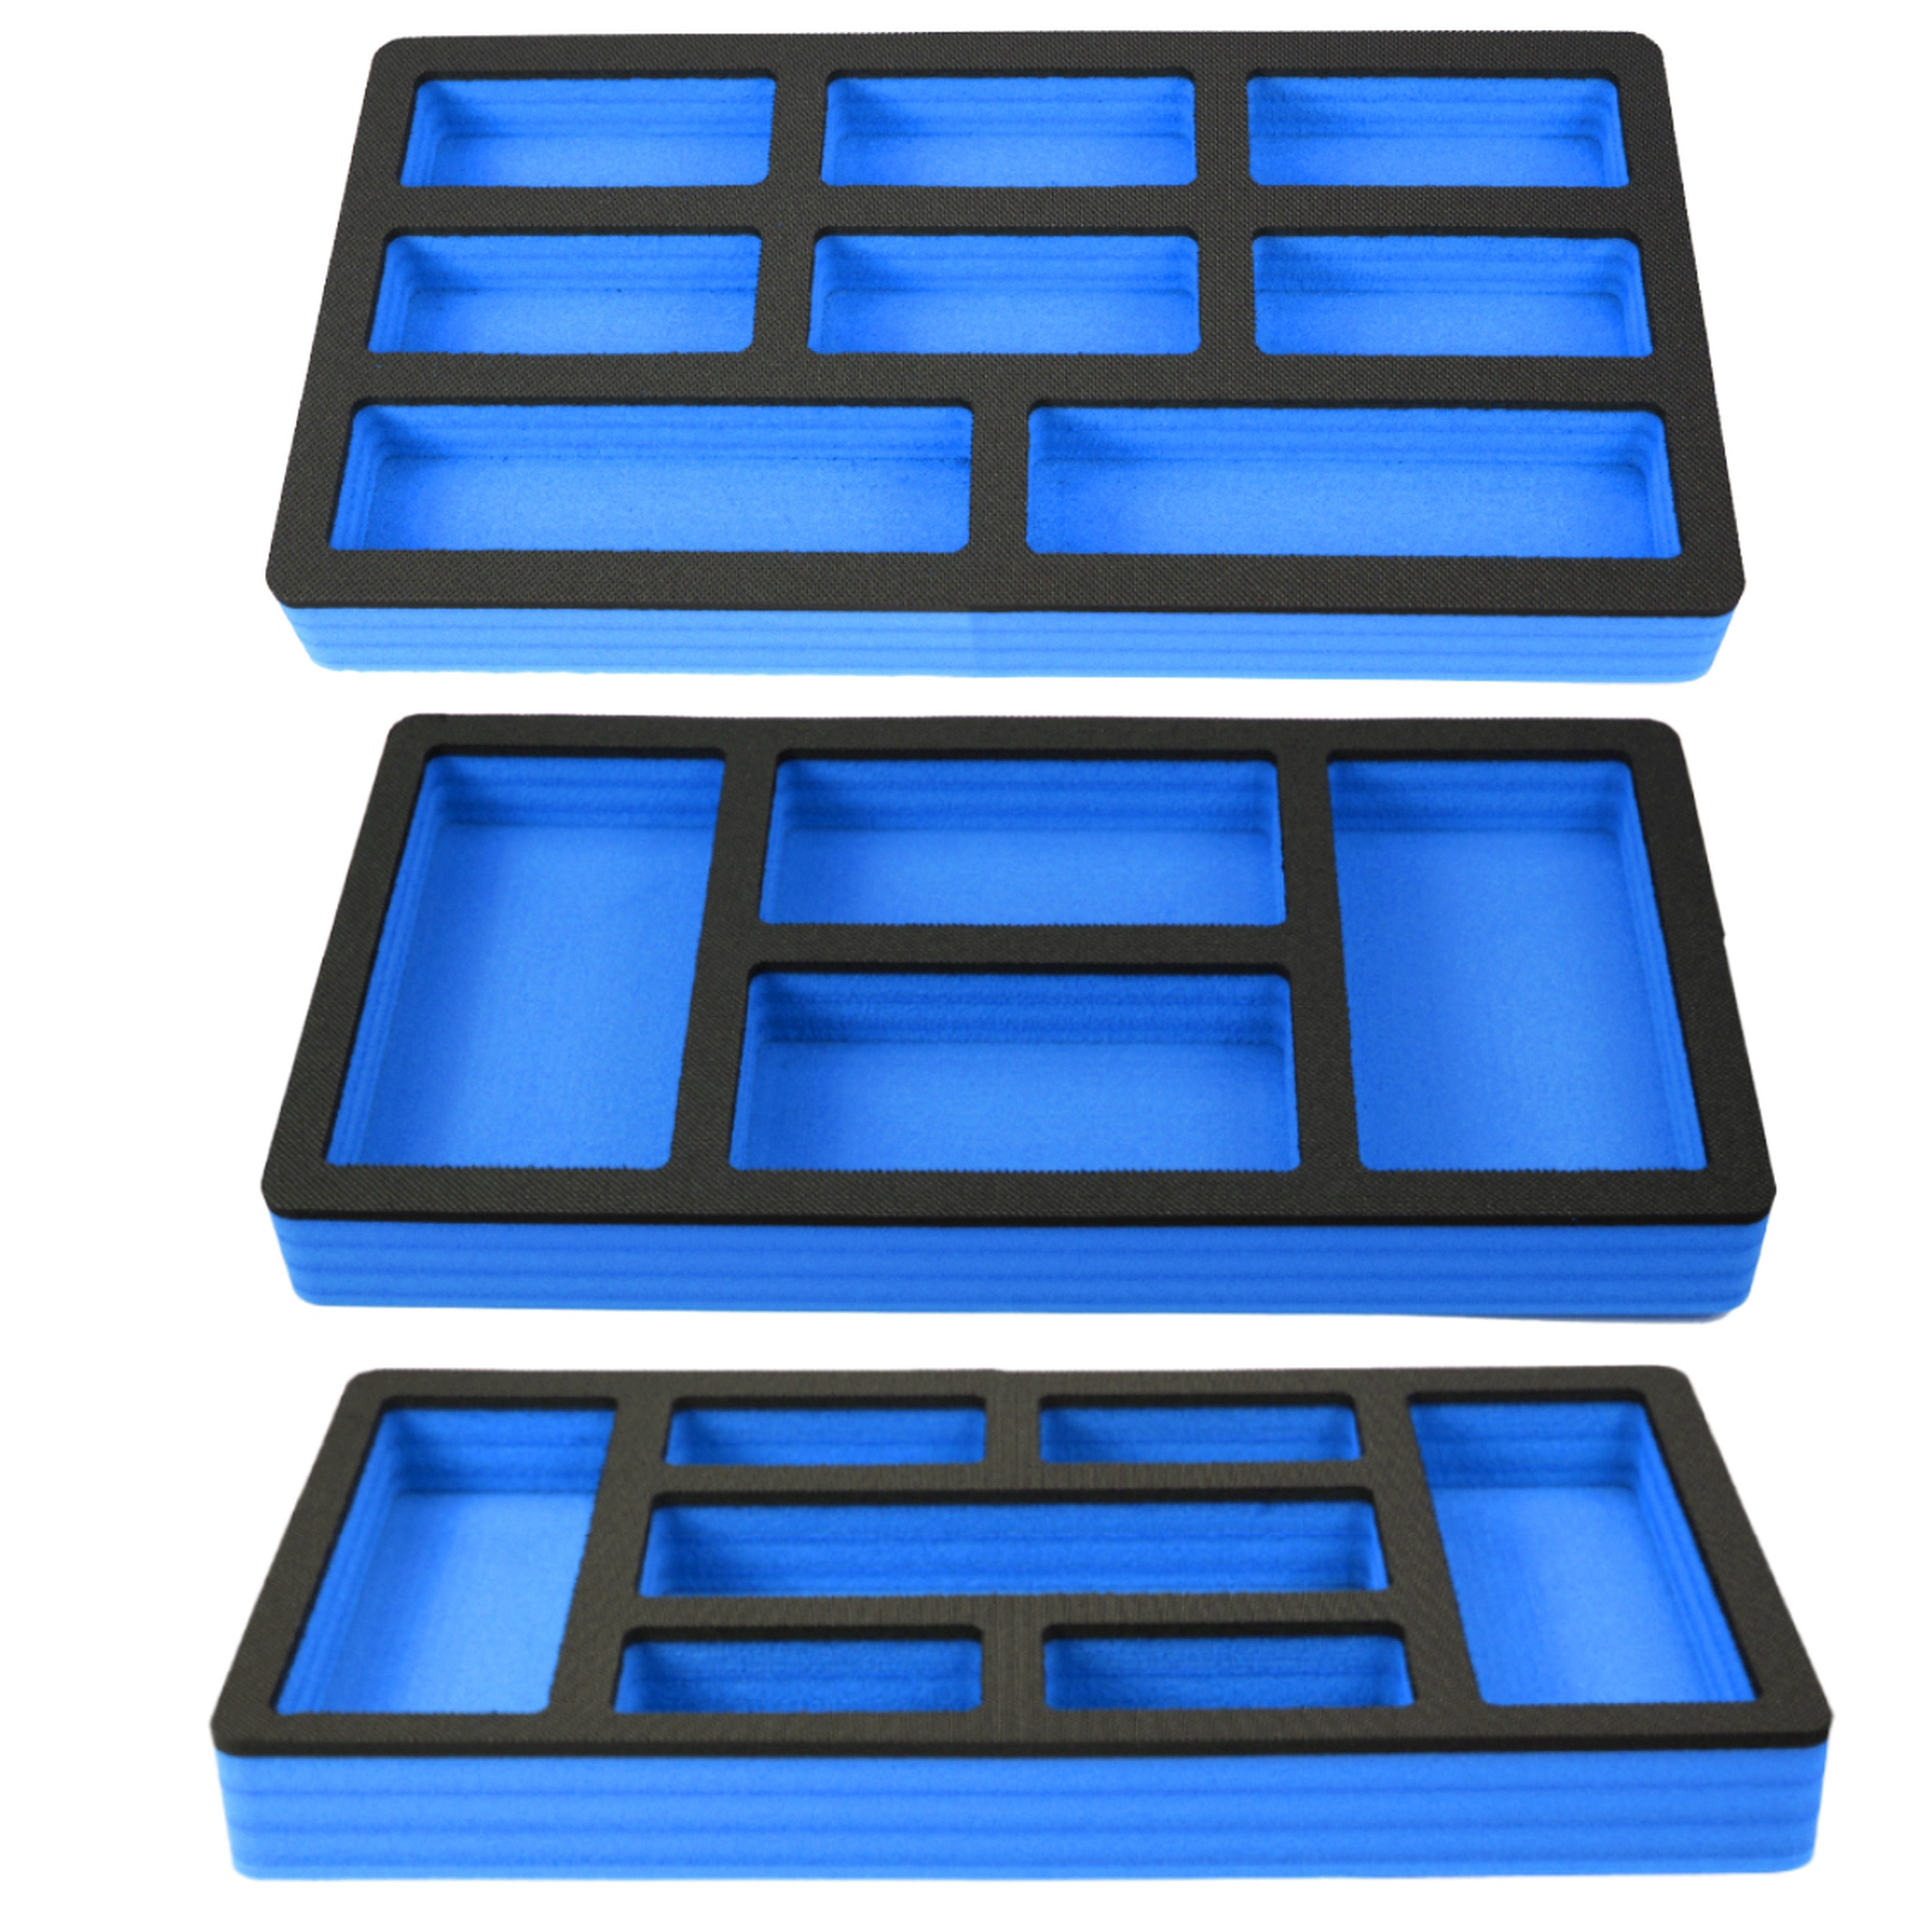 Tool Drawer Organizer 3-Piece Insert Set Blue and Black Durable Foam Non-Slip Anti-Rattle Bin Holder Tray 20 x 10 Inches Large Pockets Fits Craftsman Husky Kobalt Milwaukee and Many Others